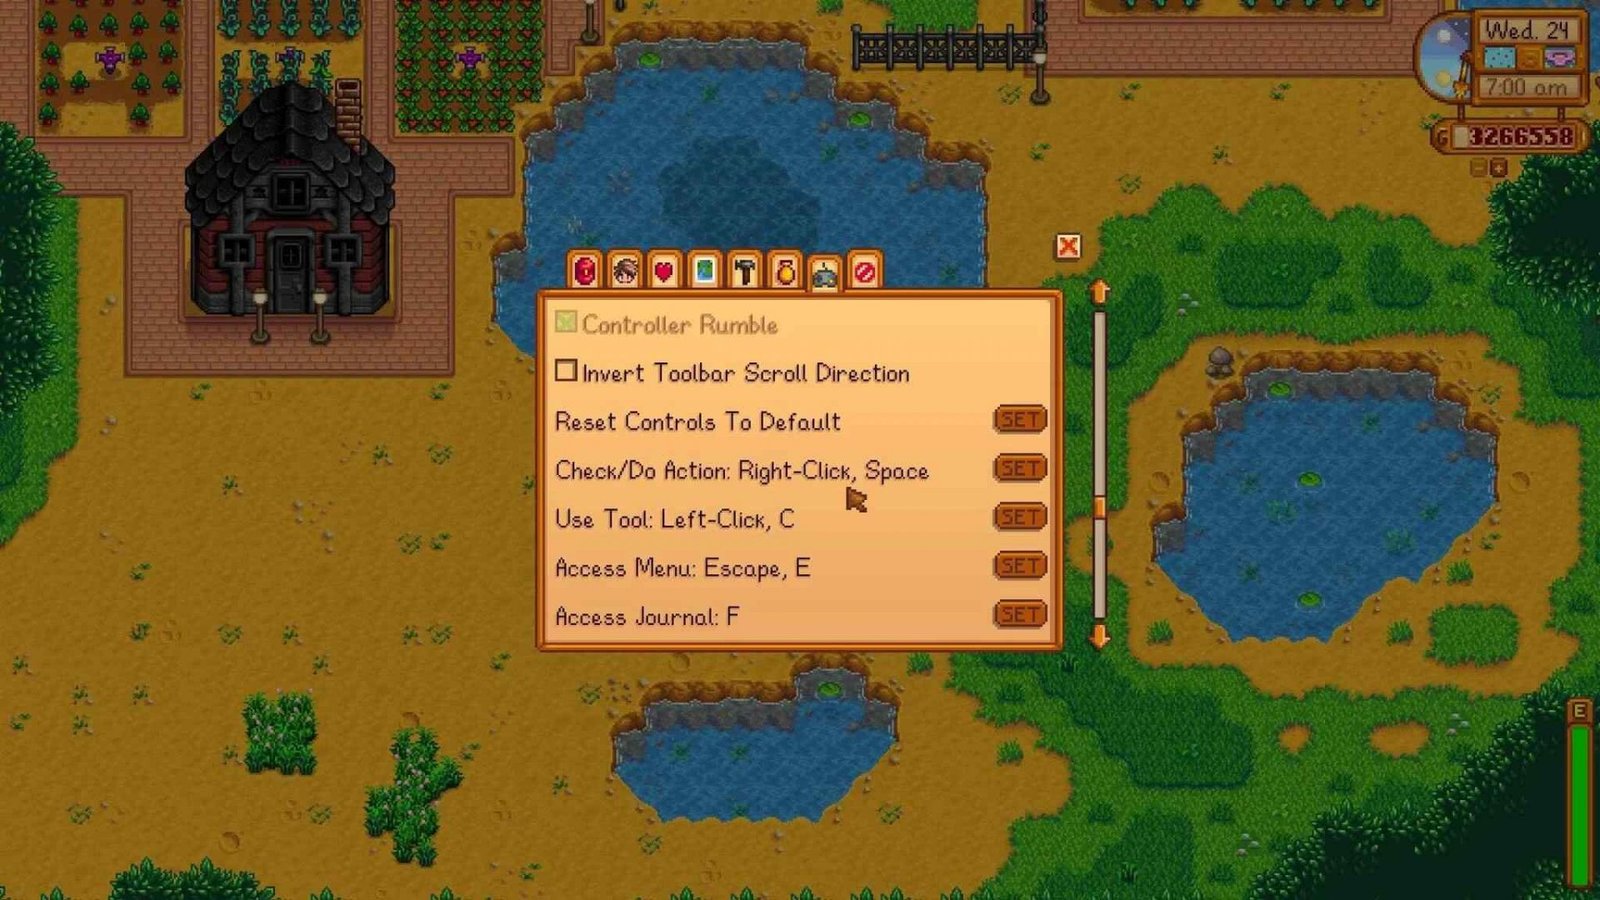 How to Animation Cancel in Stardew Valley? - GameTaco